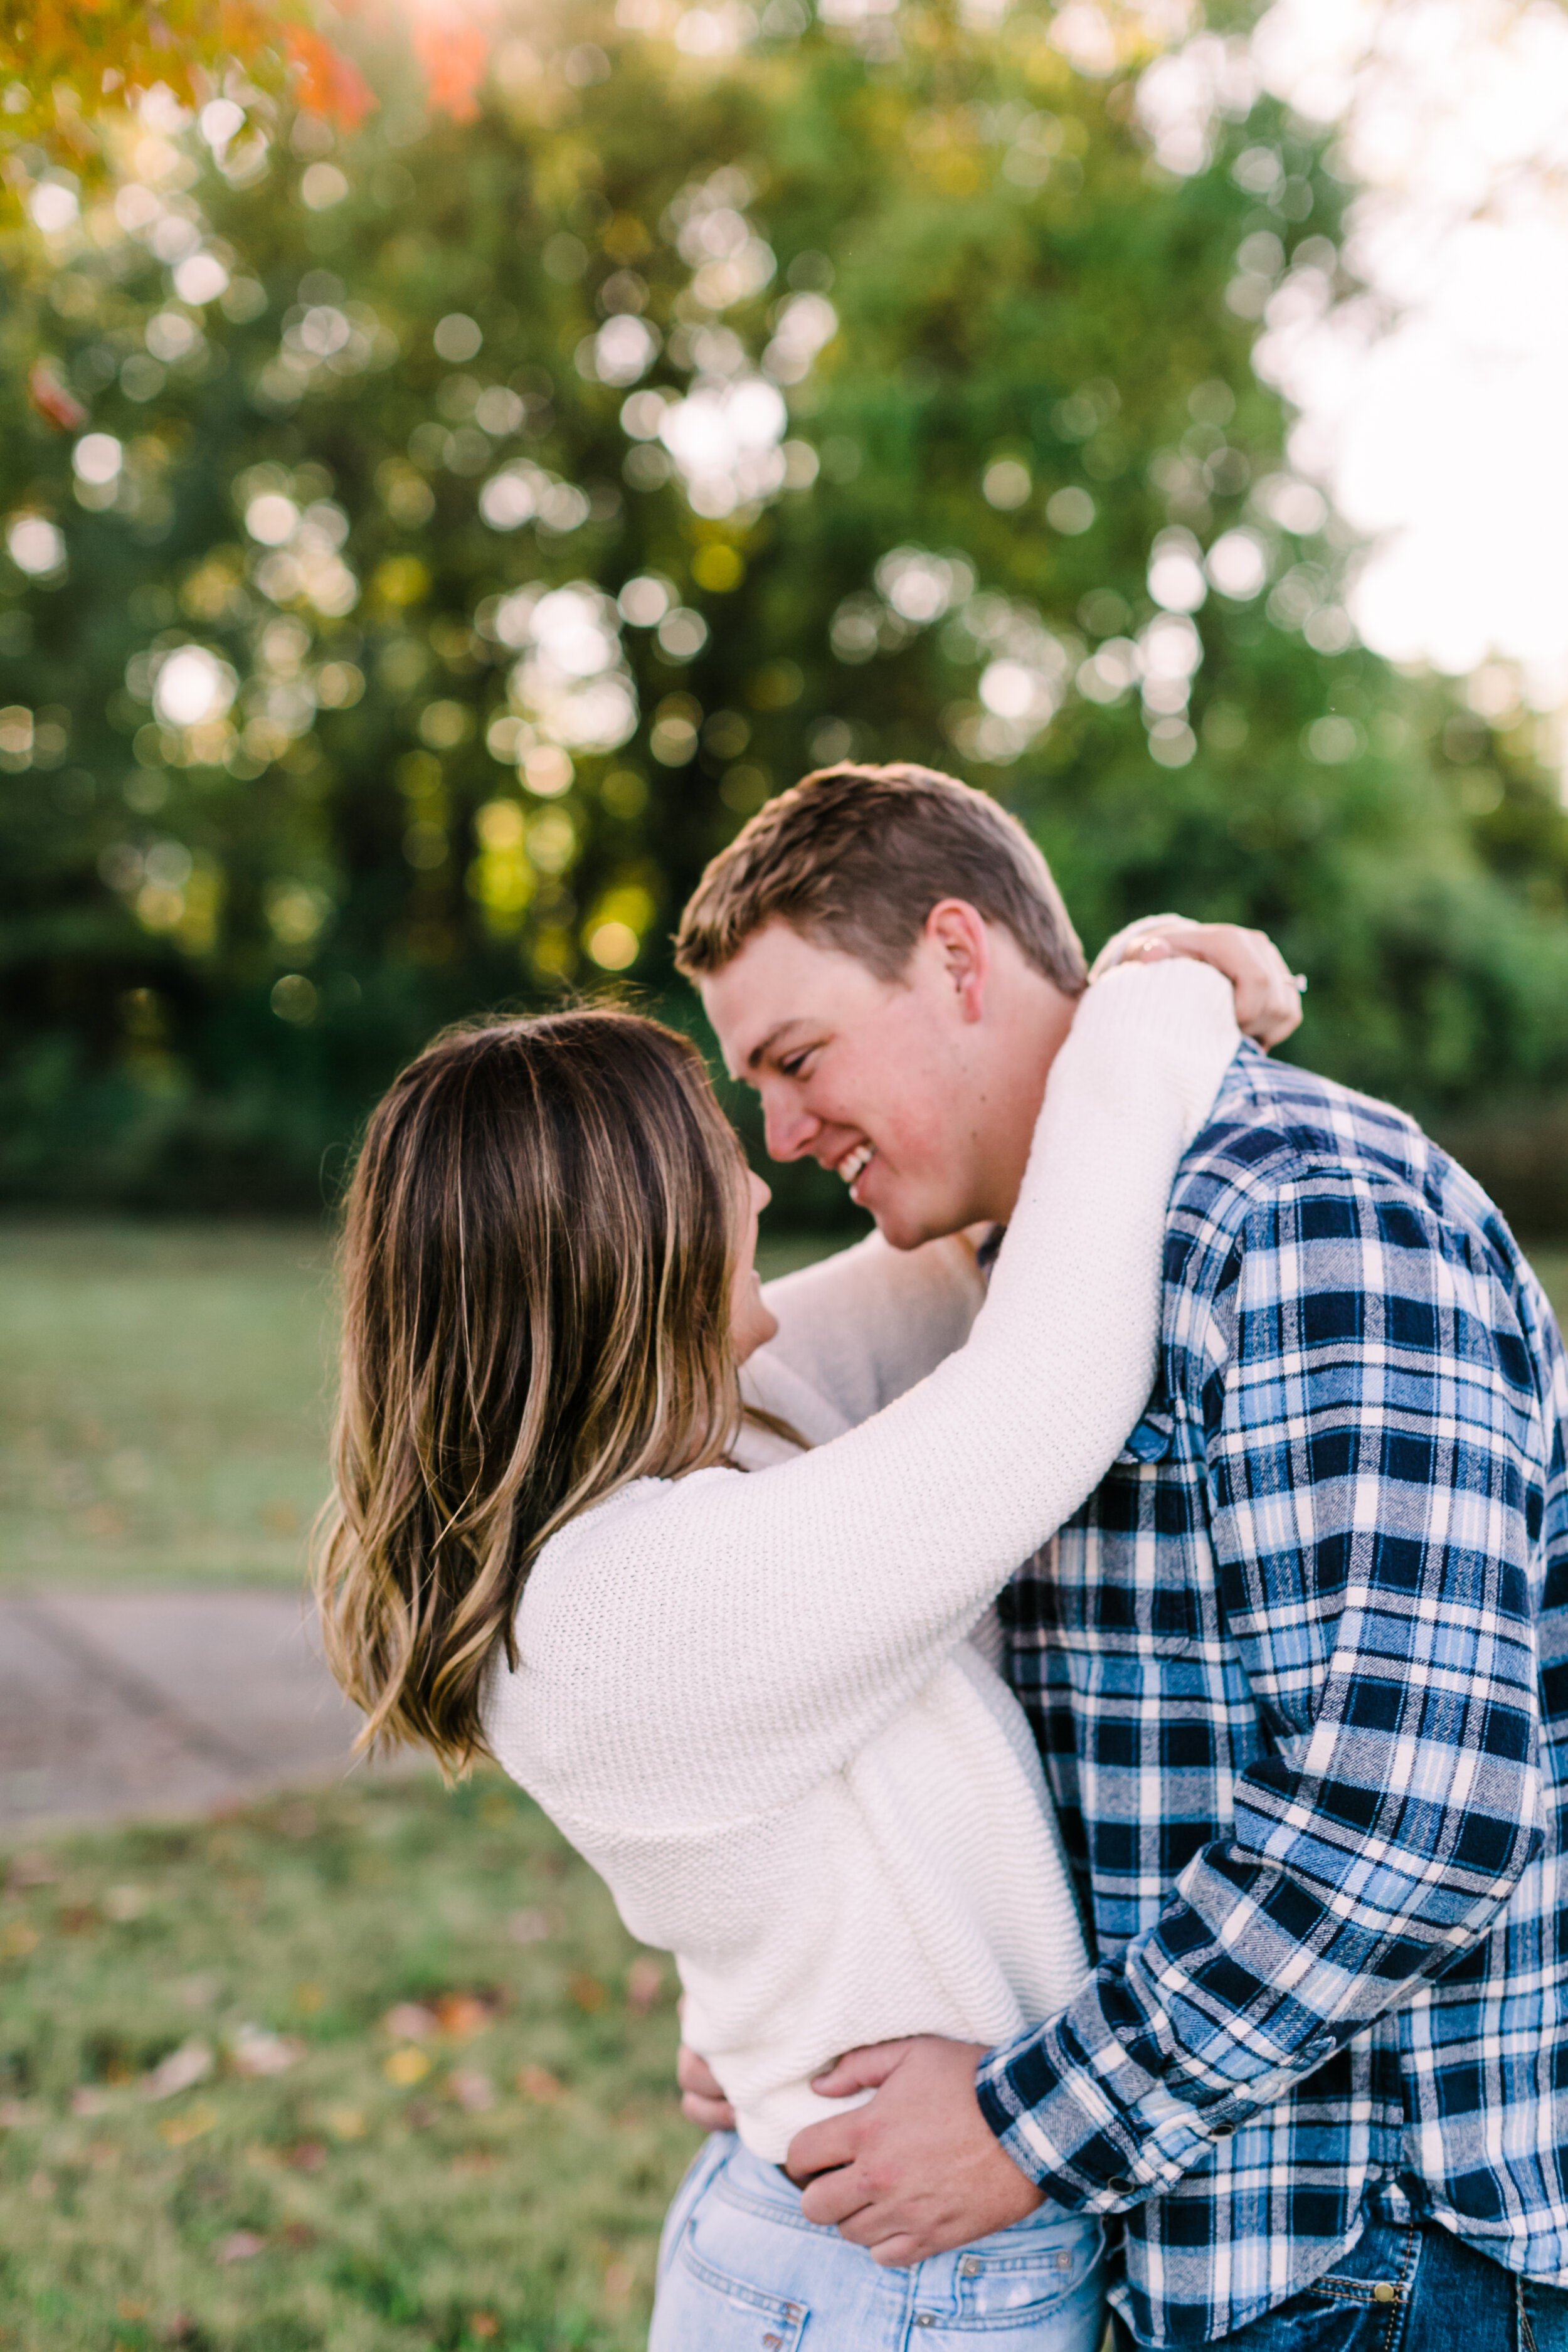 Tennessee+Fall+Engagement+Photos+Puppy (7 of 63).jpg